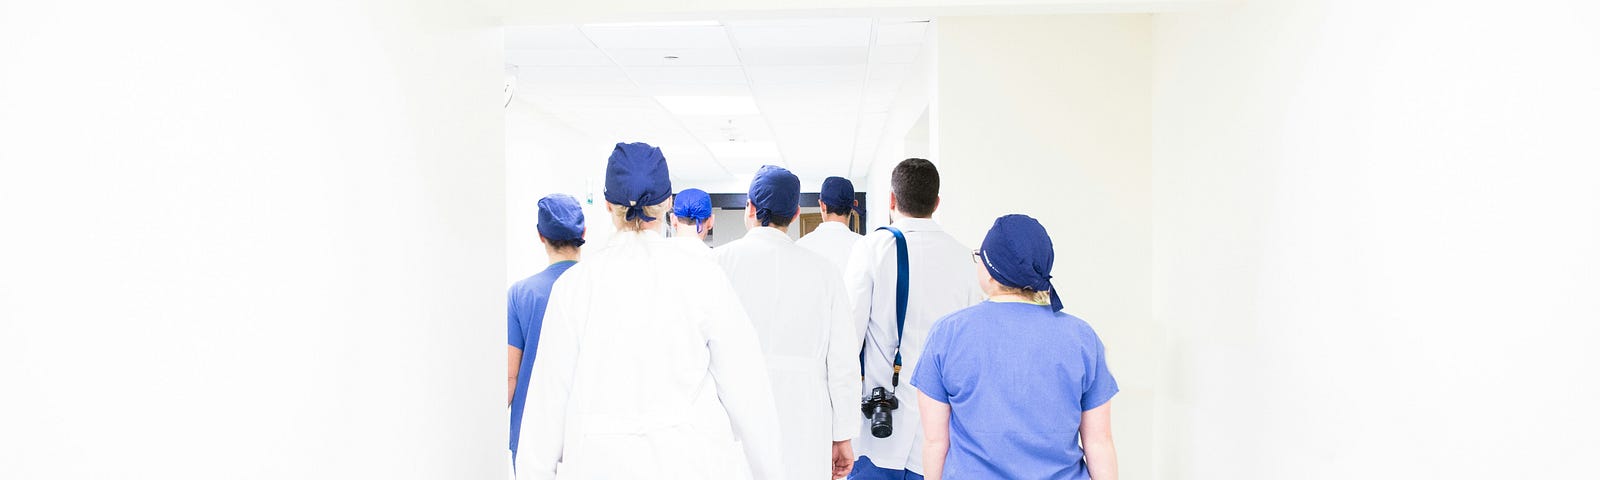 A photo of a group of doctors walking to a location.